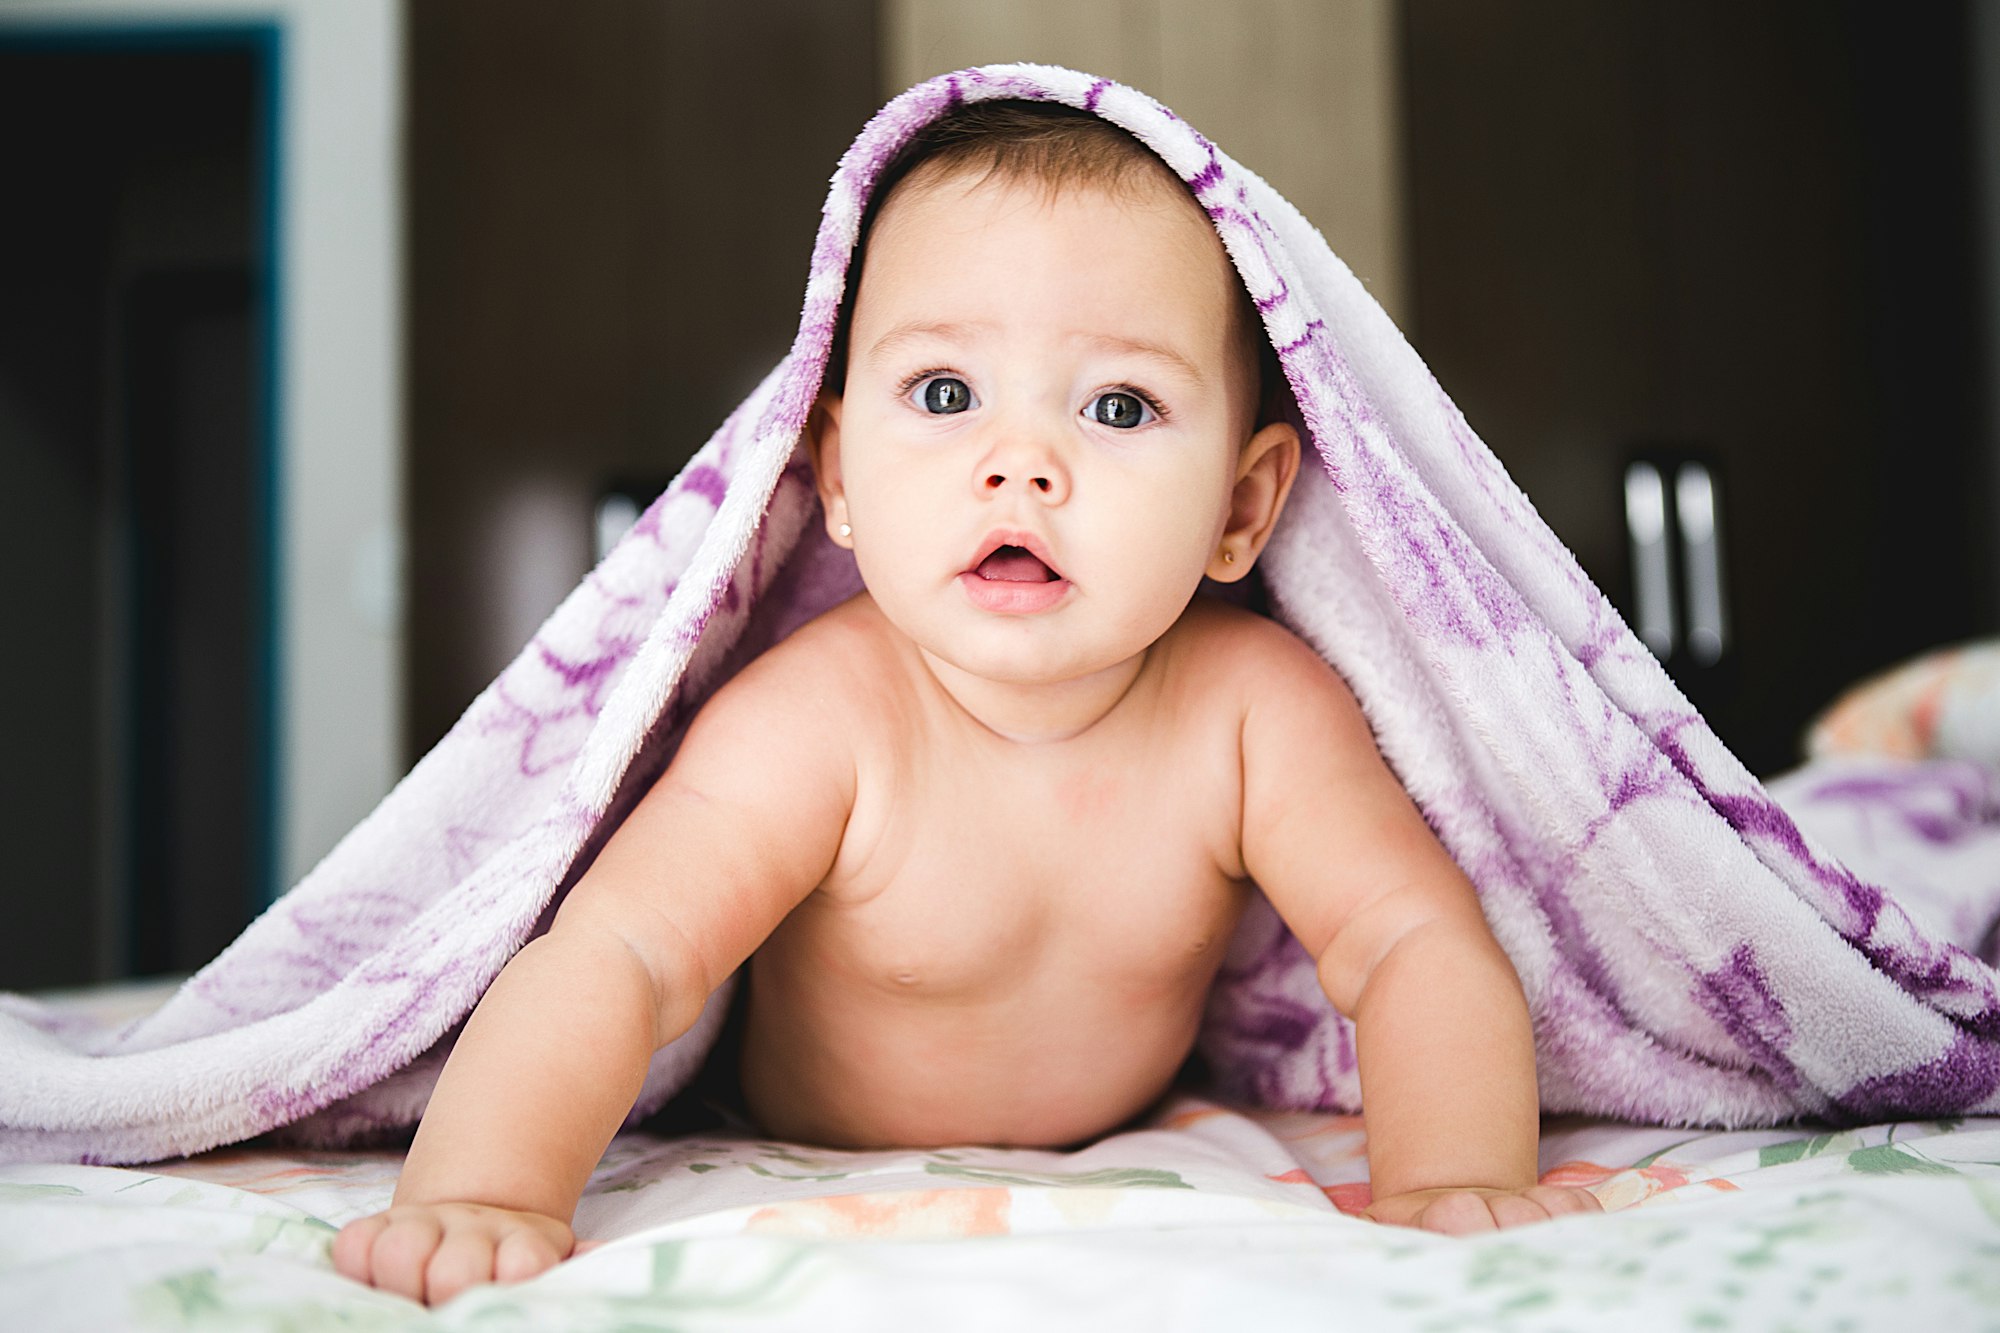 Planning a baby? Plan your finances first